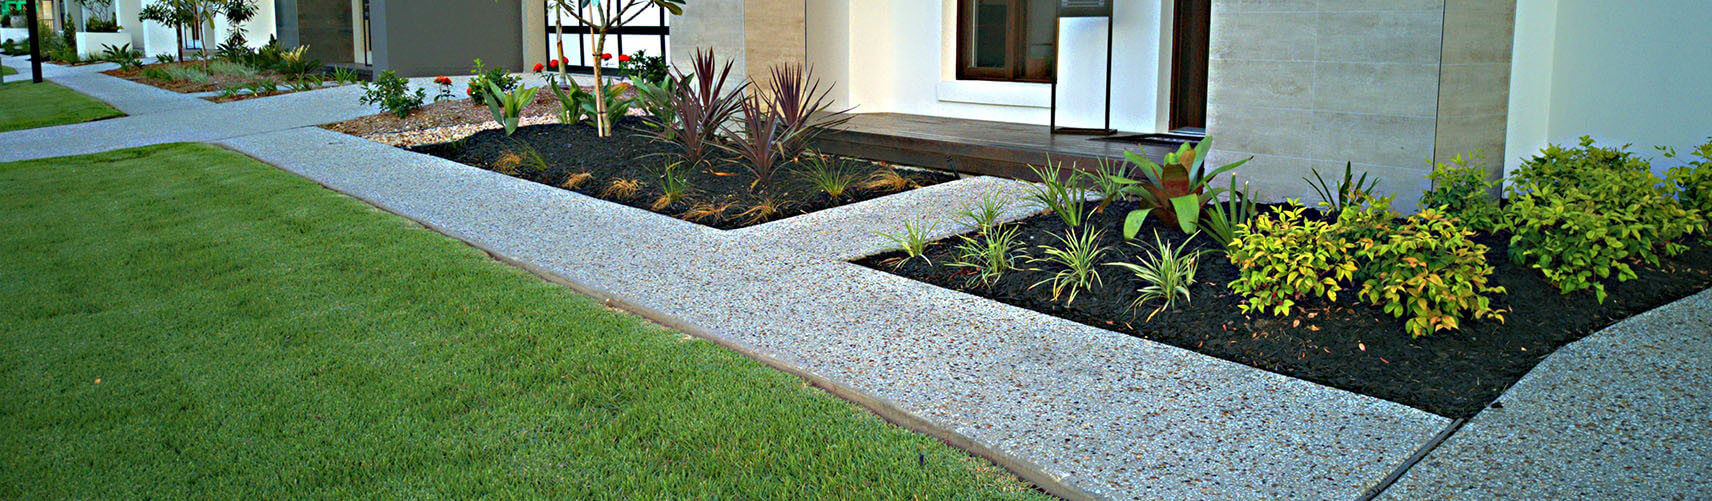 Bellevue Landscaping Company, Landscaper and Landscaping Services